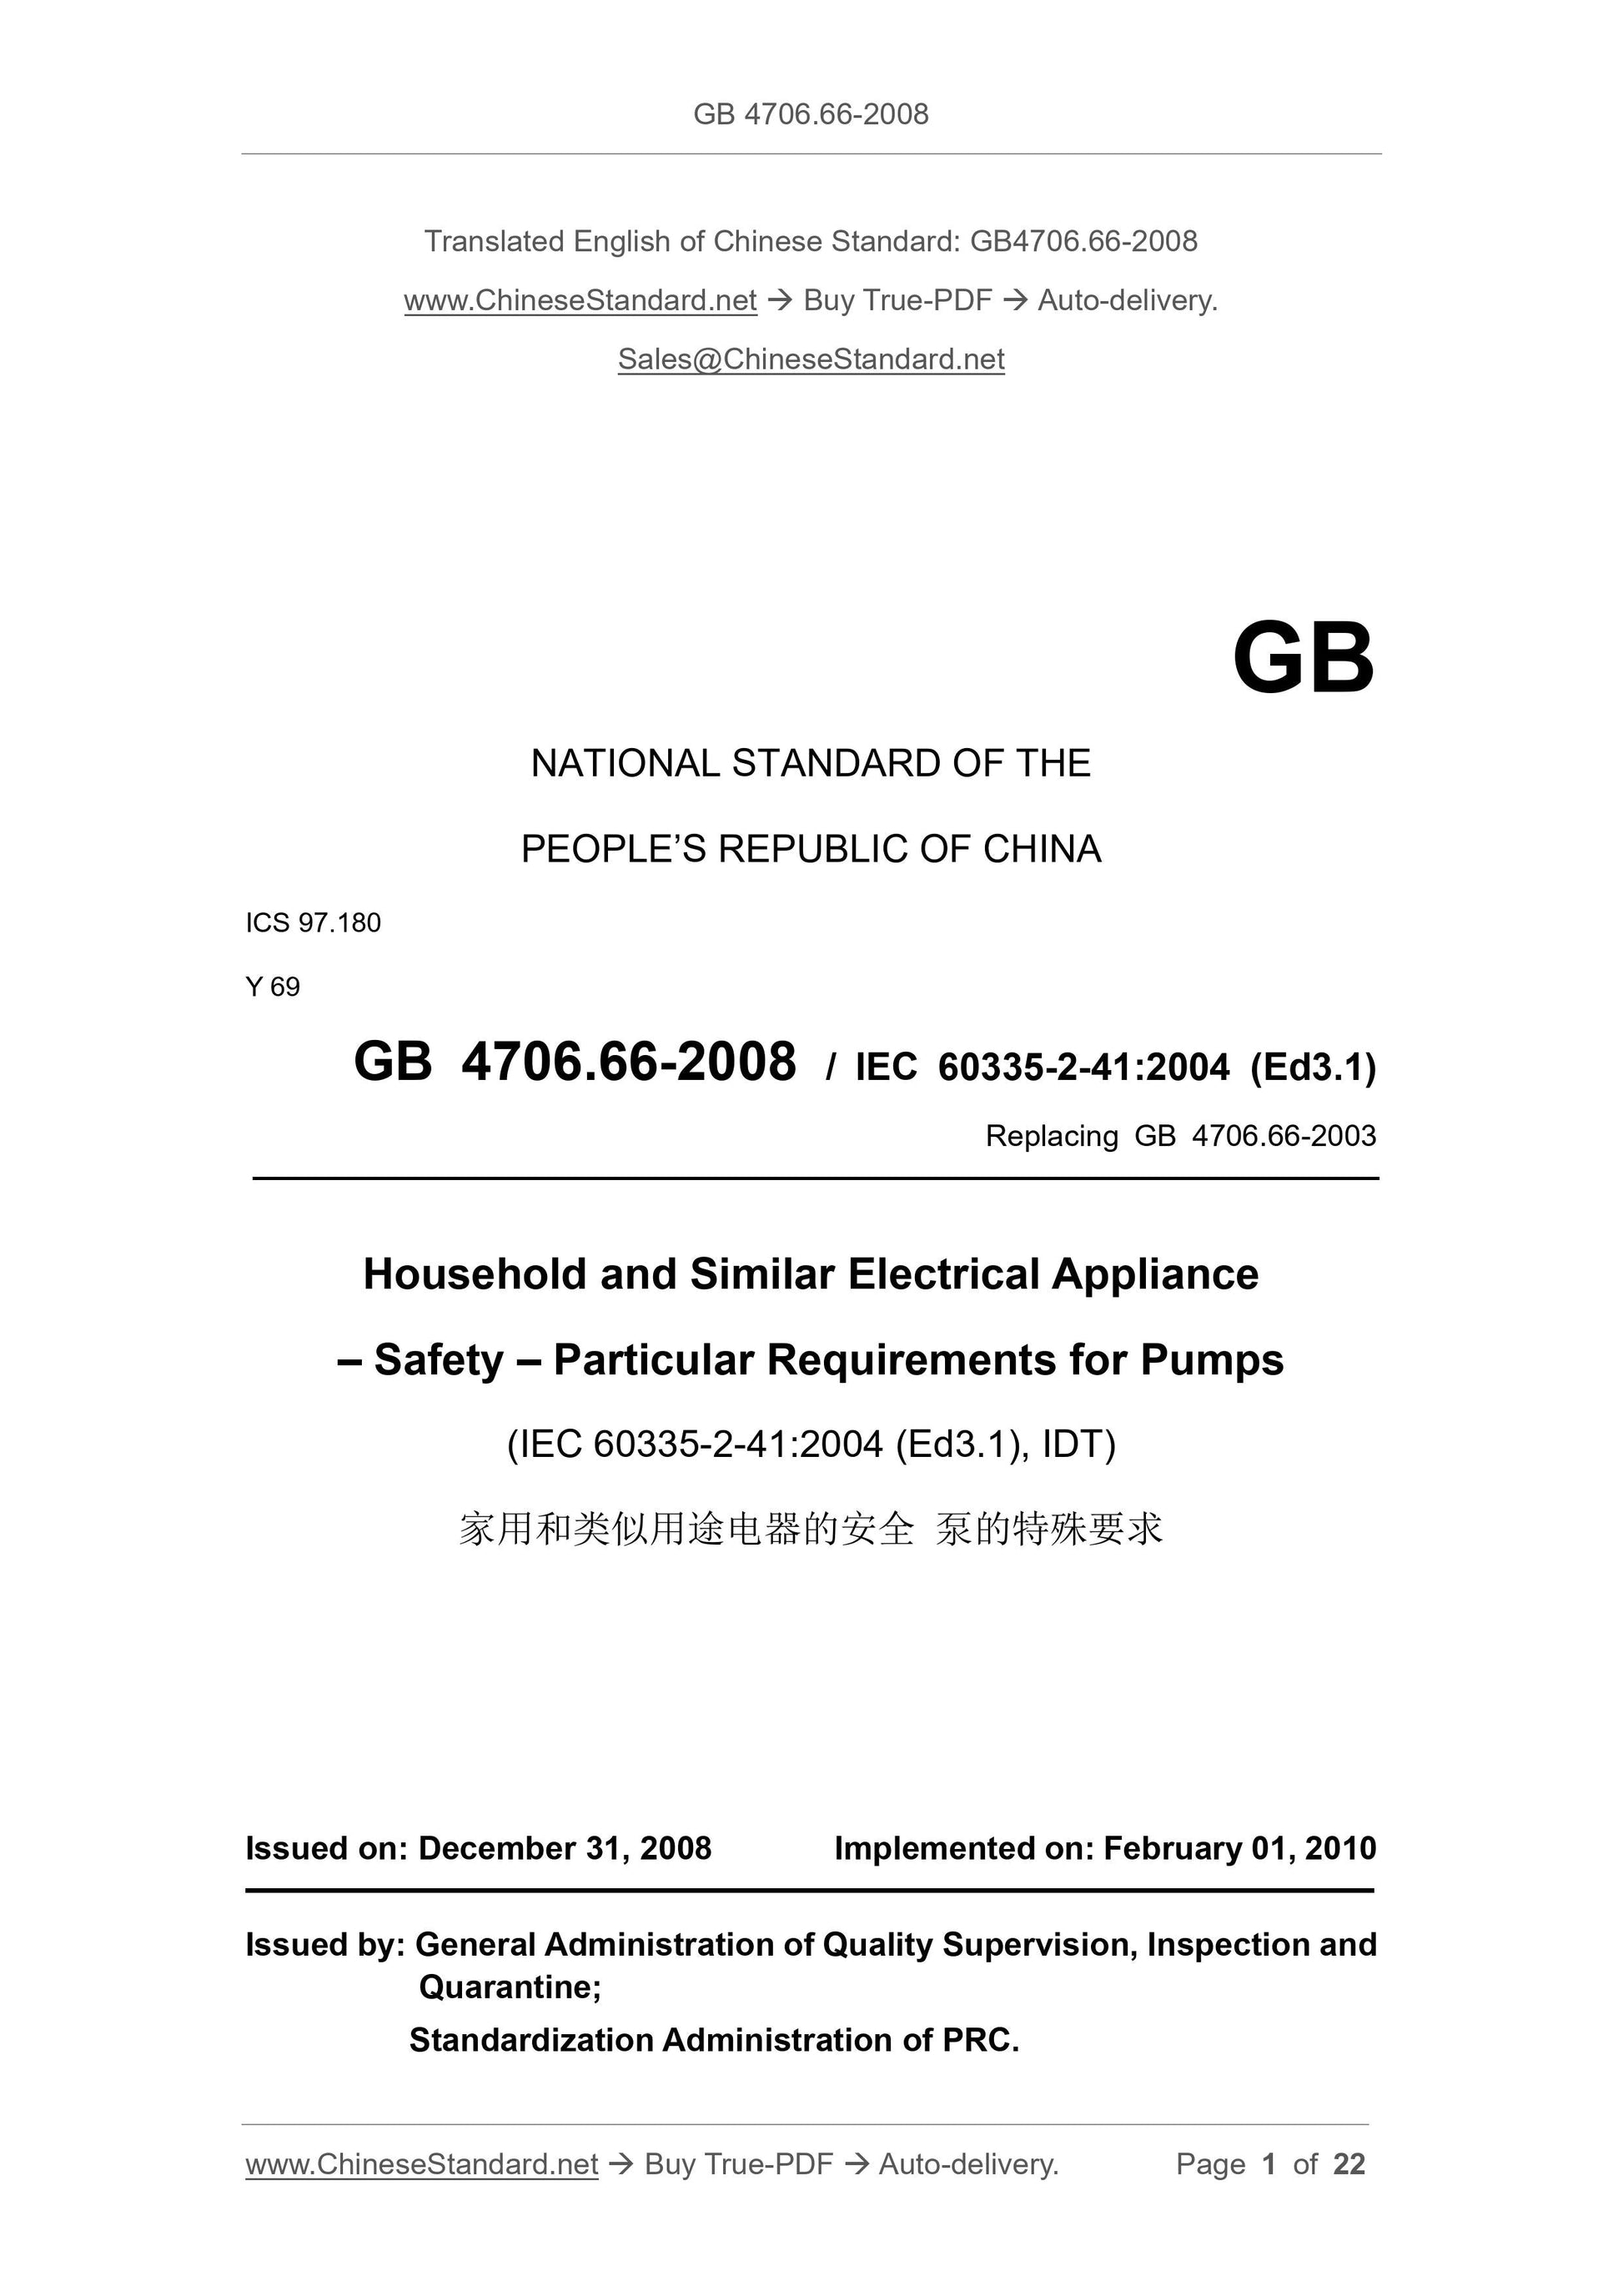 GB 4706.66-2008 Page 1